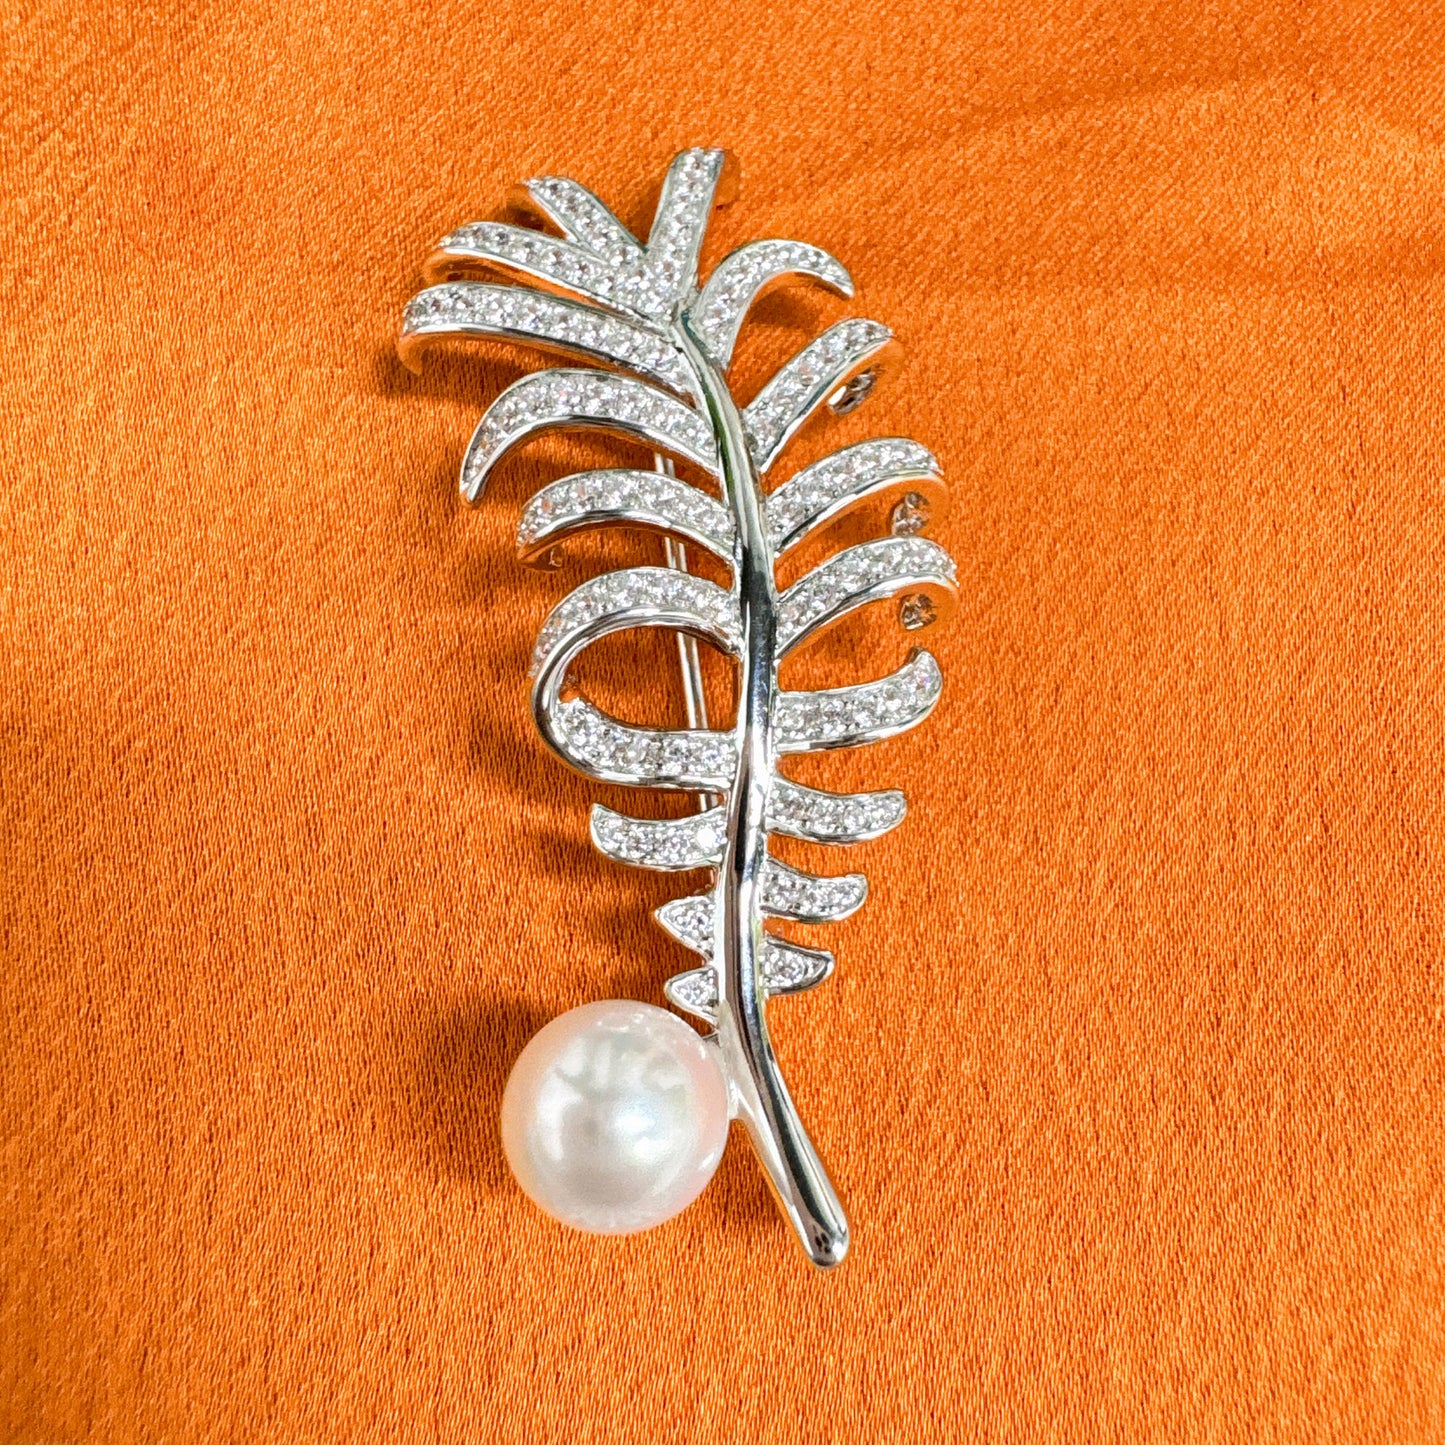 Handmade feather pearl brooch, women's brooches pins, jewelry ring, mother's day gifts, dress accessories,silver feathers broaches crafts